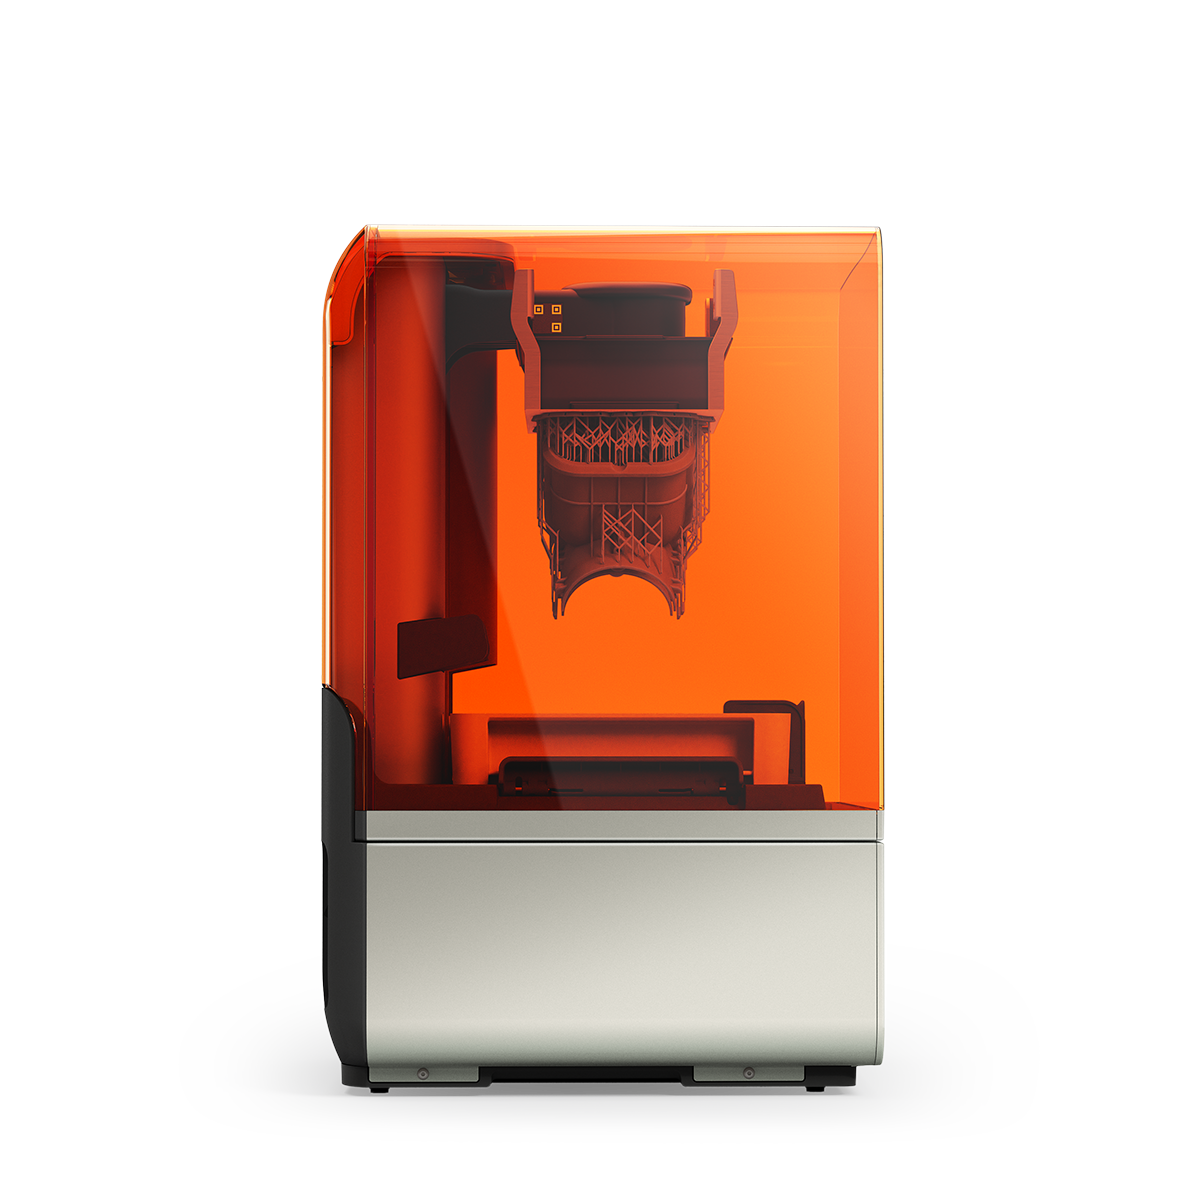 Formlabs Form 4 Basic Package